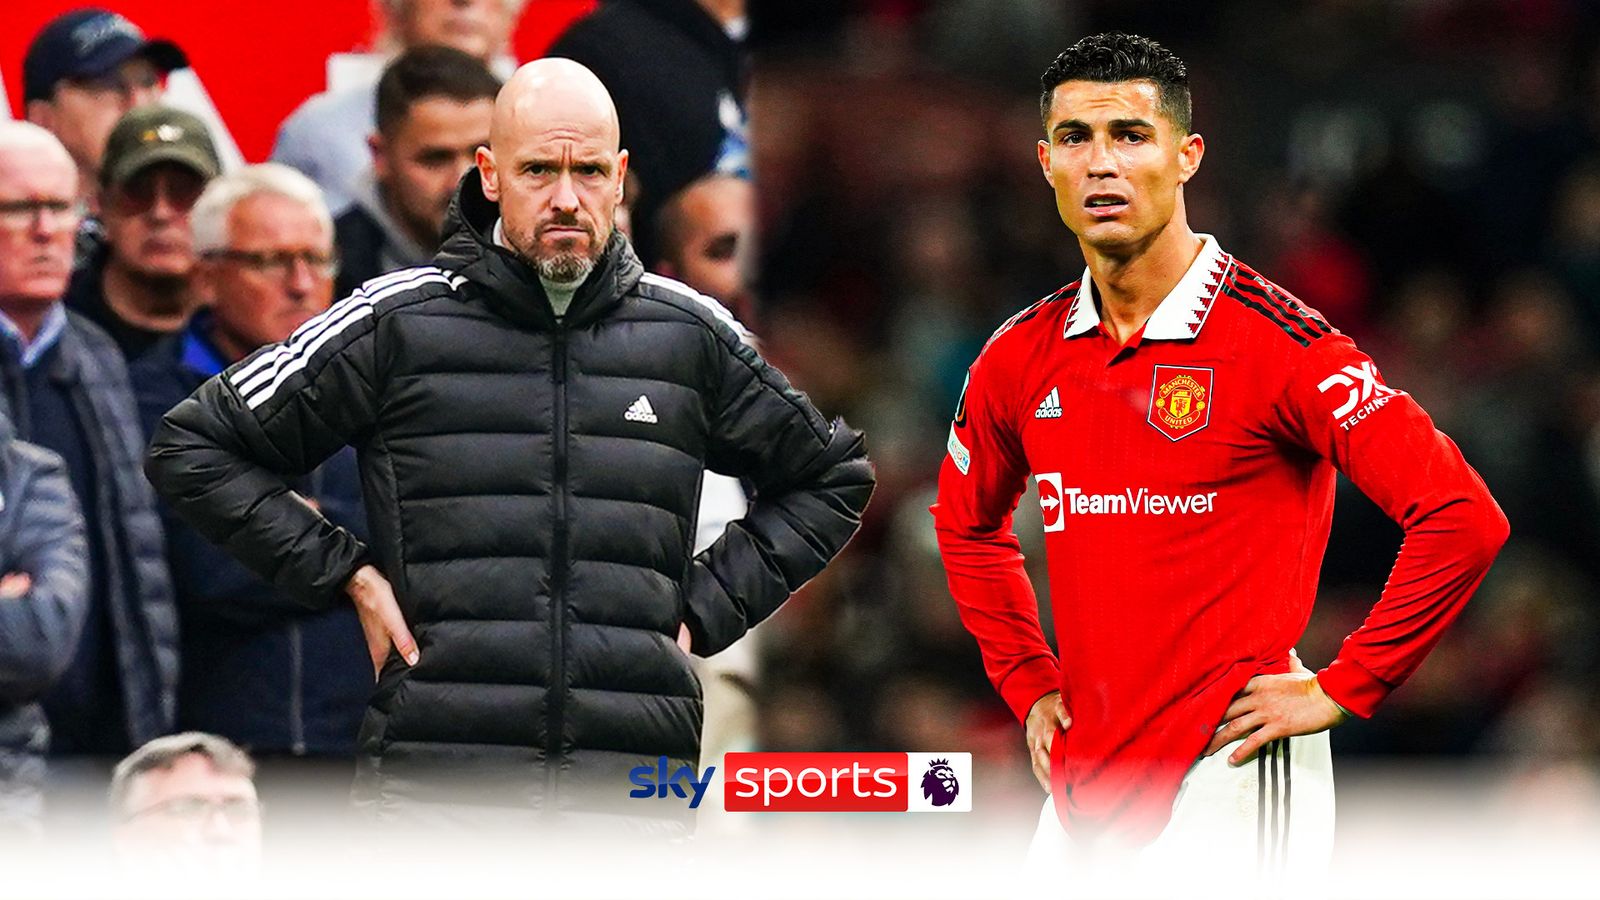 Cristiano Ronaldo: Man Utd boss Erik ten Hag says he 'counts on' striker and expects him to stay at club beyond January transfer window